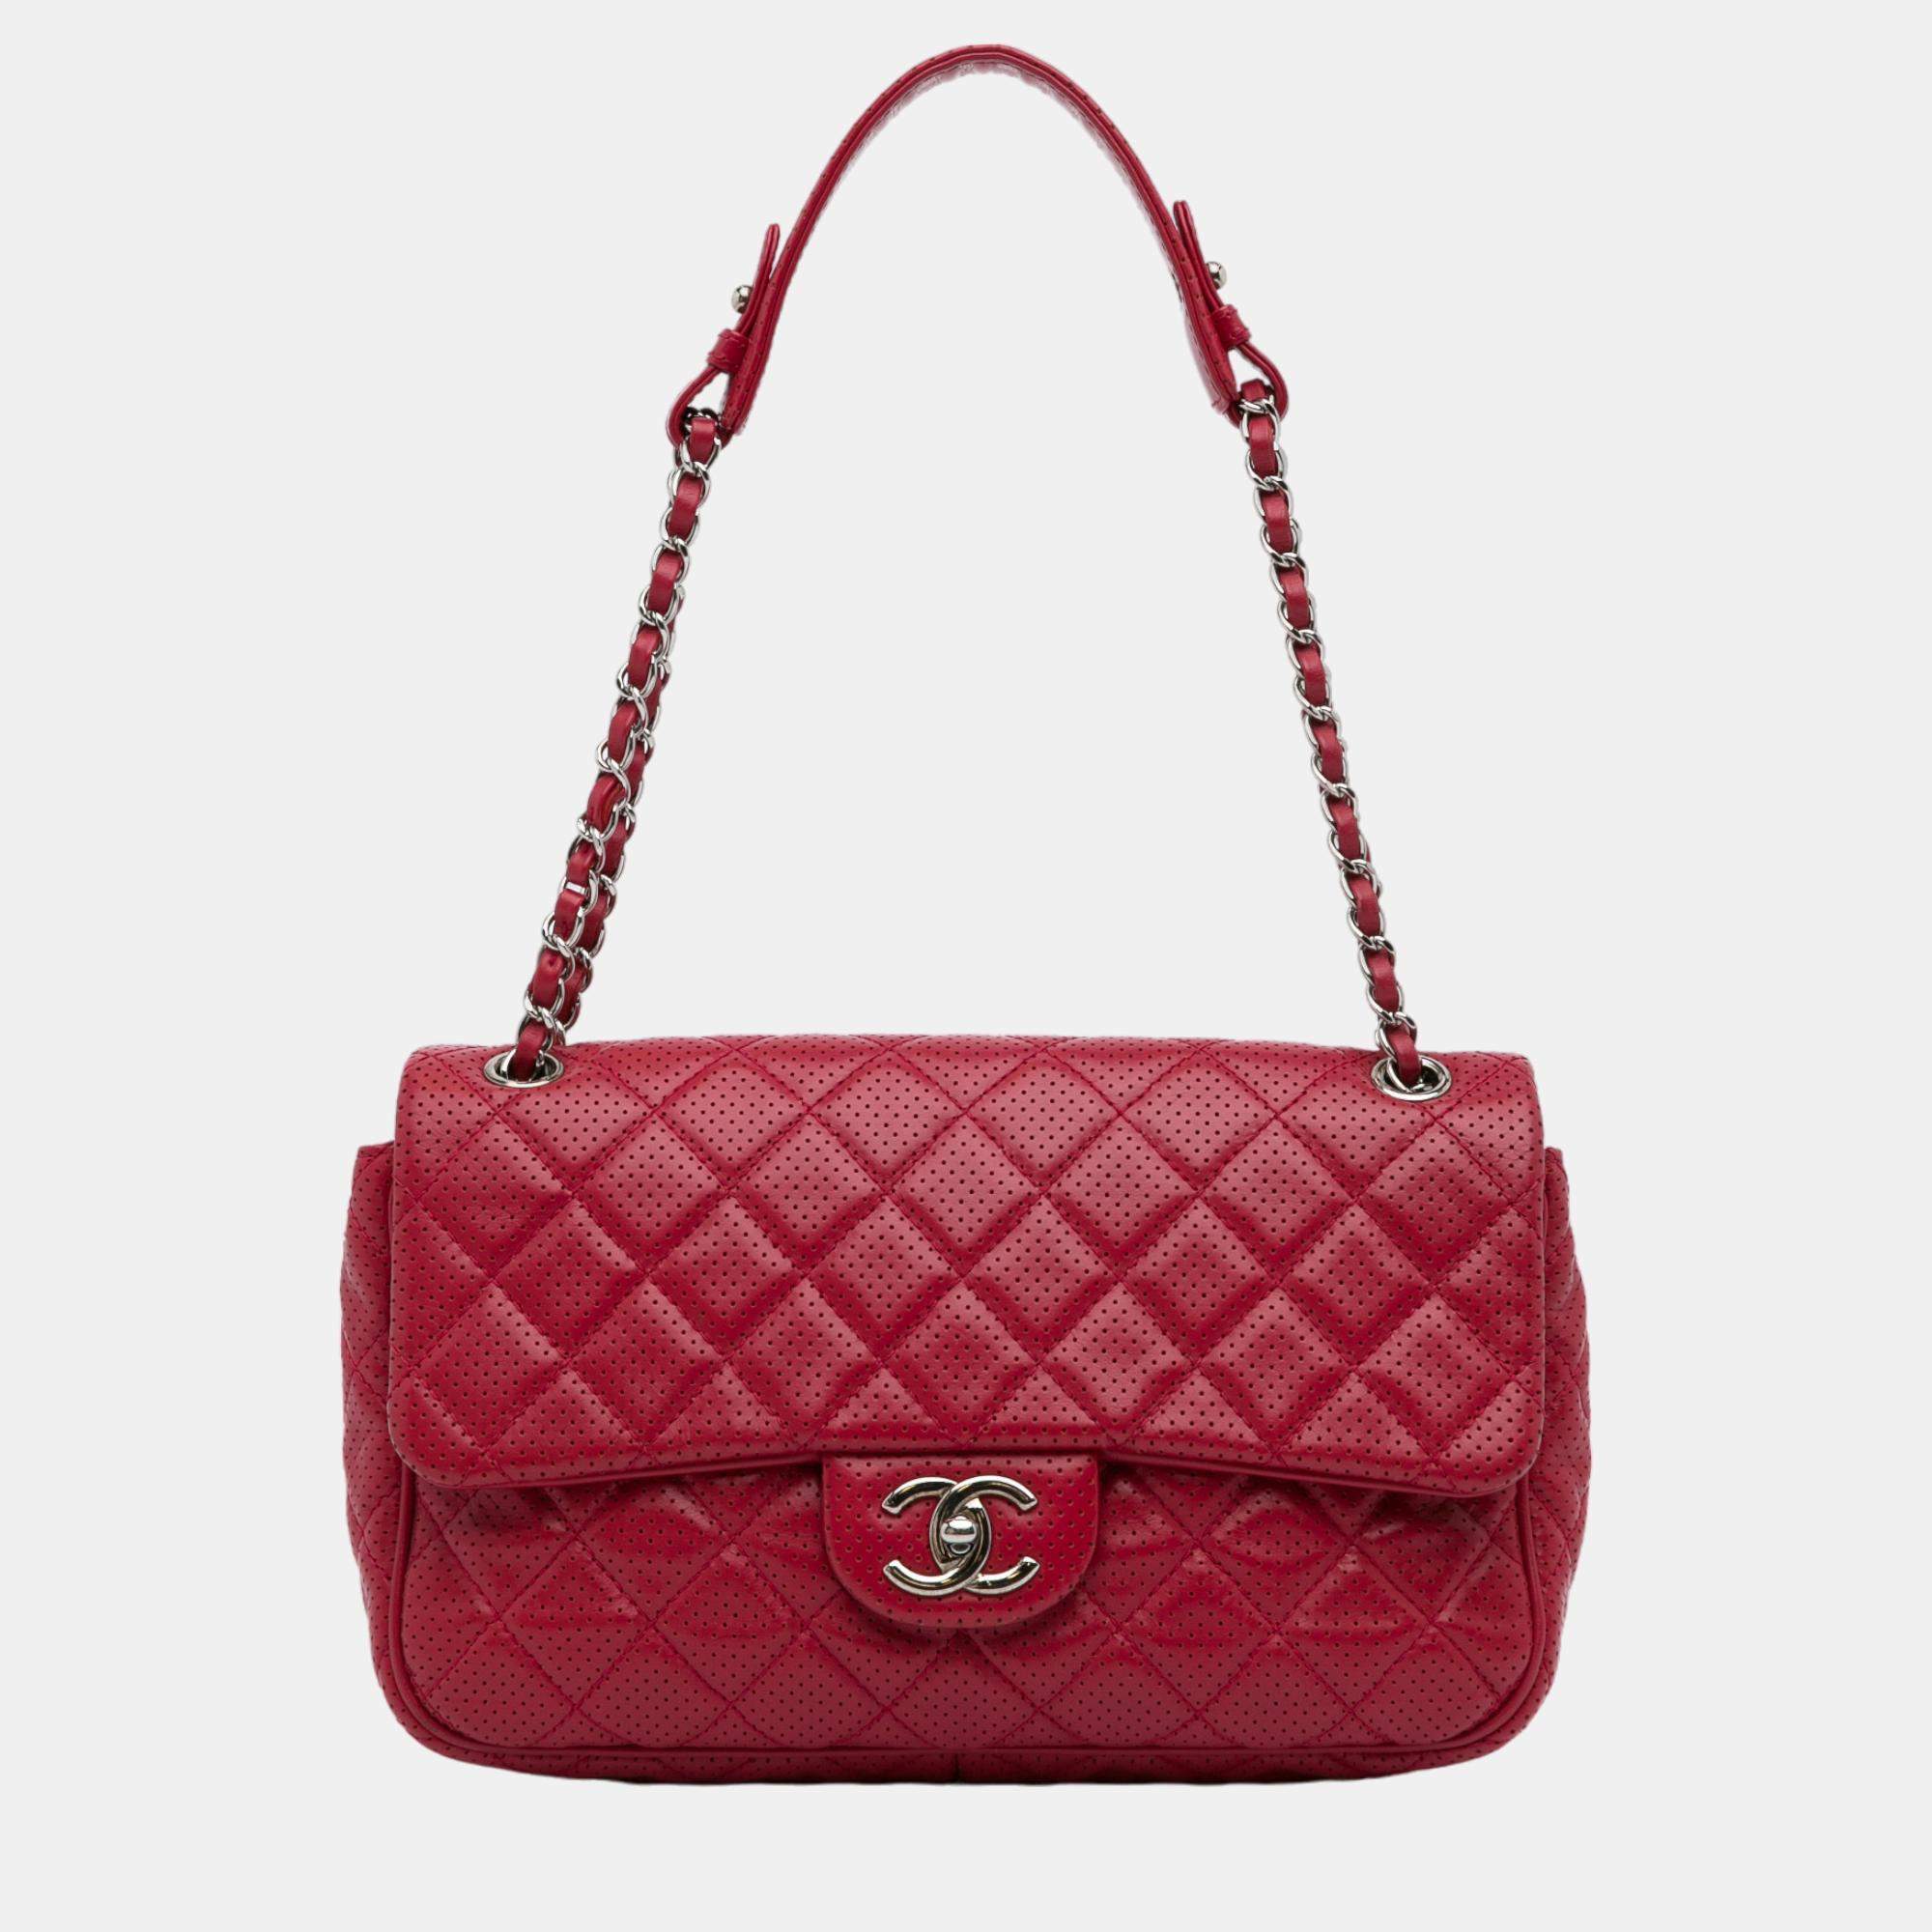 Chanel Red Jumbo Classic Perforated Lambskin Single Flap Chanel